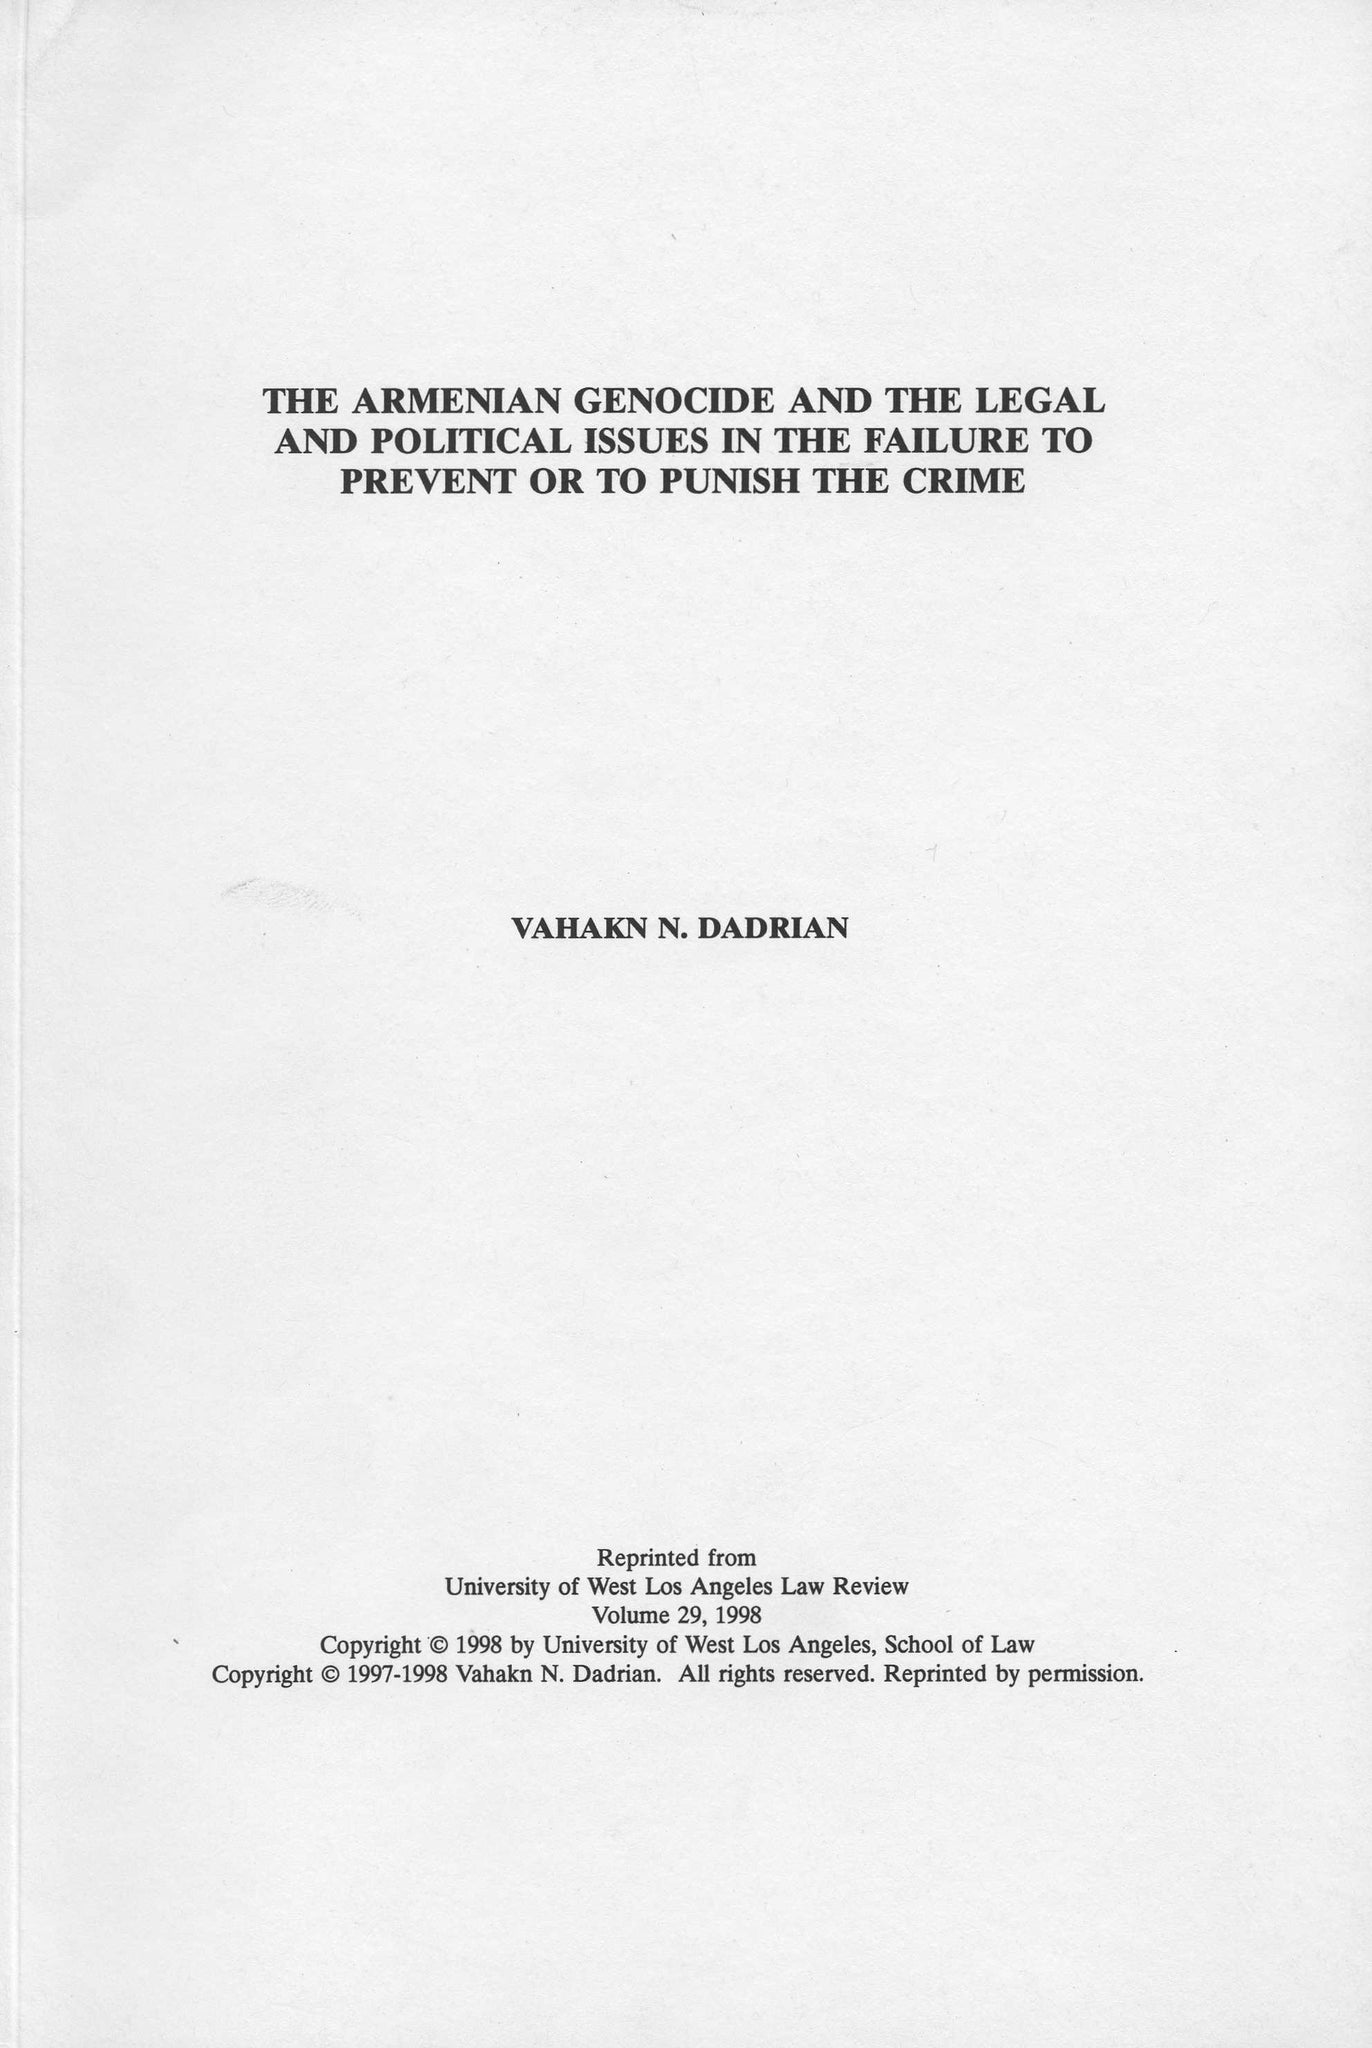 Armenian Genocide and the Legal and Political Issues in the Failure to Prevent of to Punish the Crime, The